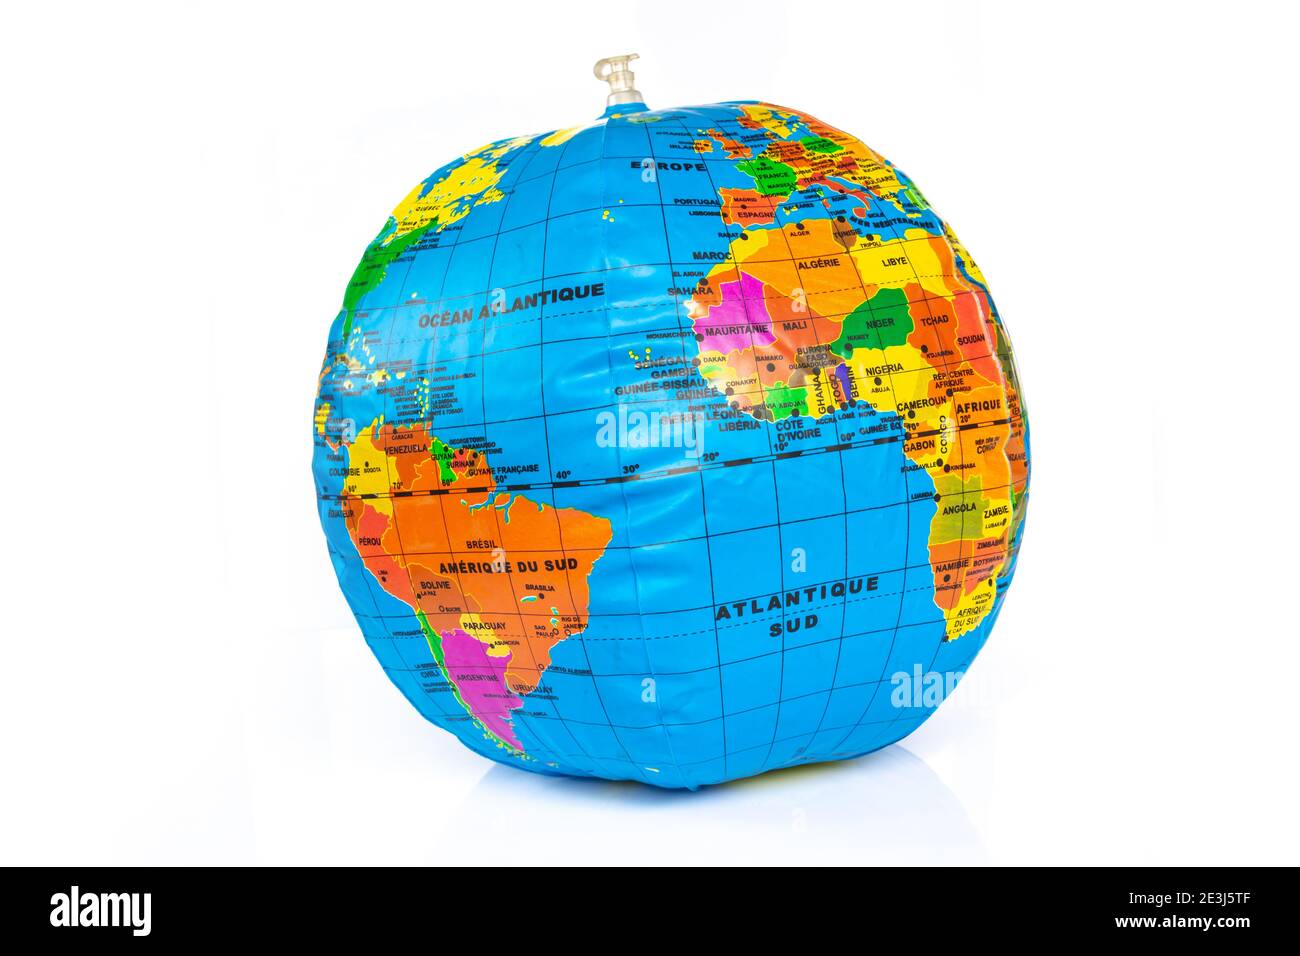 Planet earth toy balloon inflated isolated on white background. sustainable resources consumption and economy concept Stock Photo